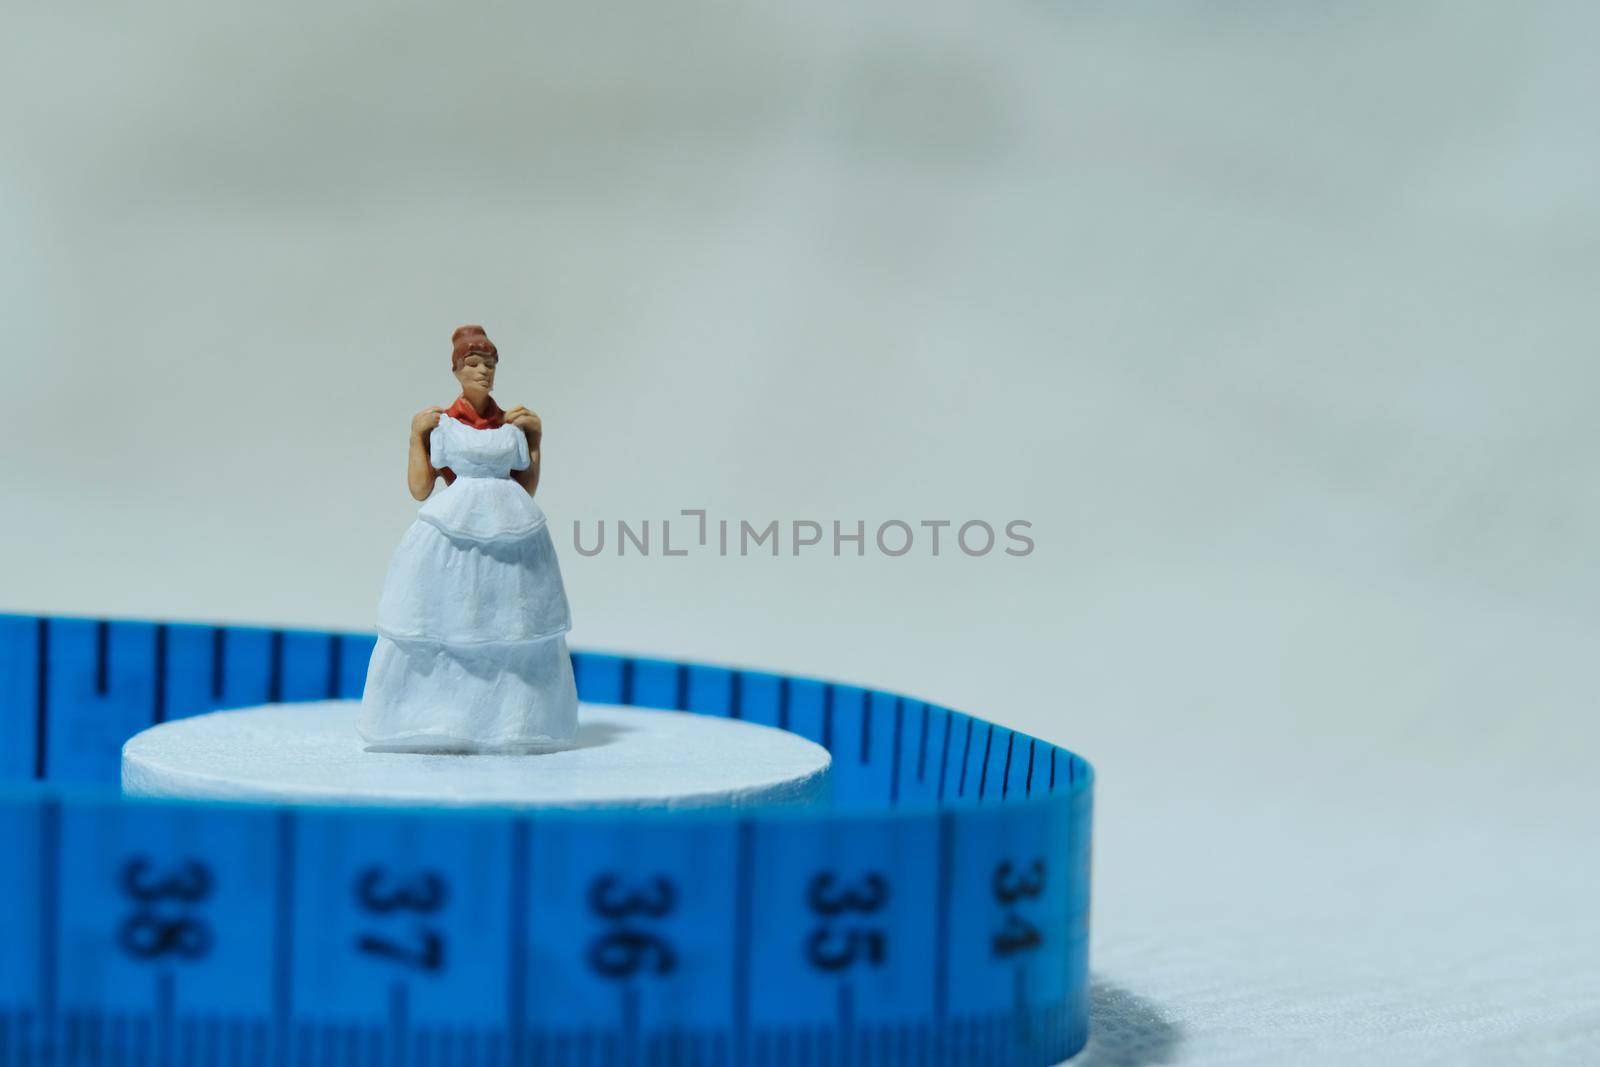 Women miniature people standing above measuring tape to fix her wedding dress. Image photo by Macrostud